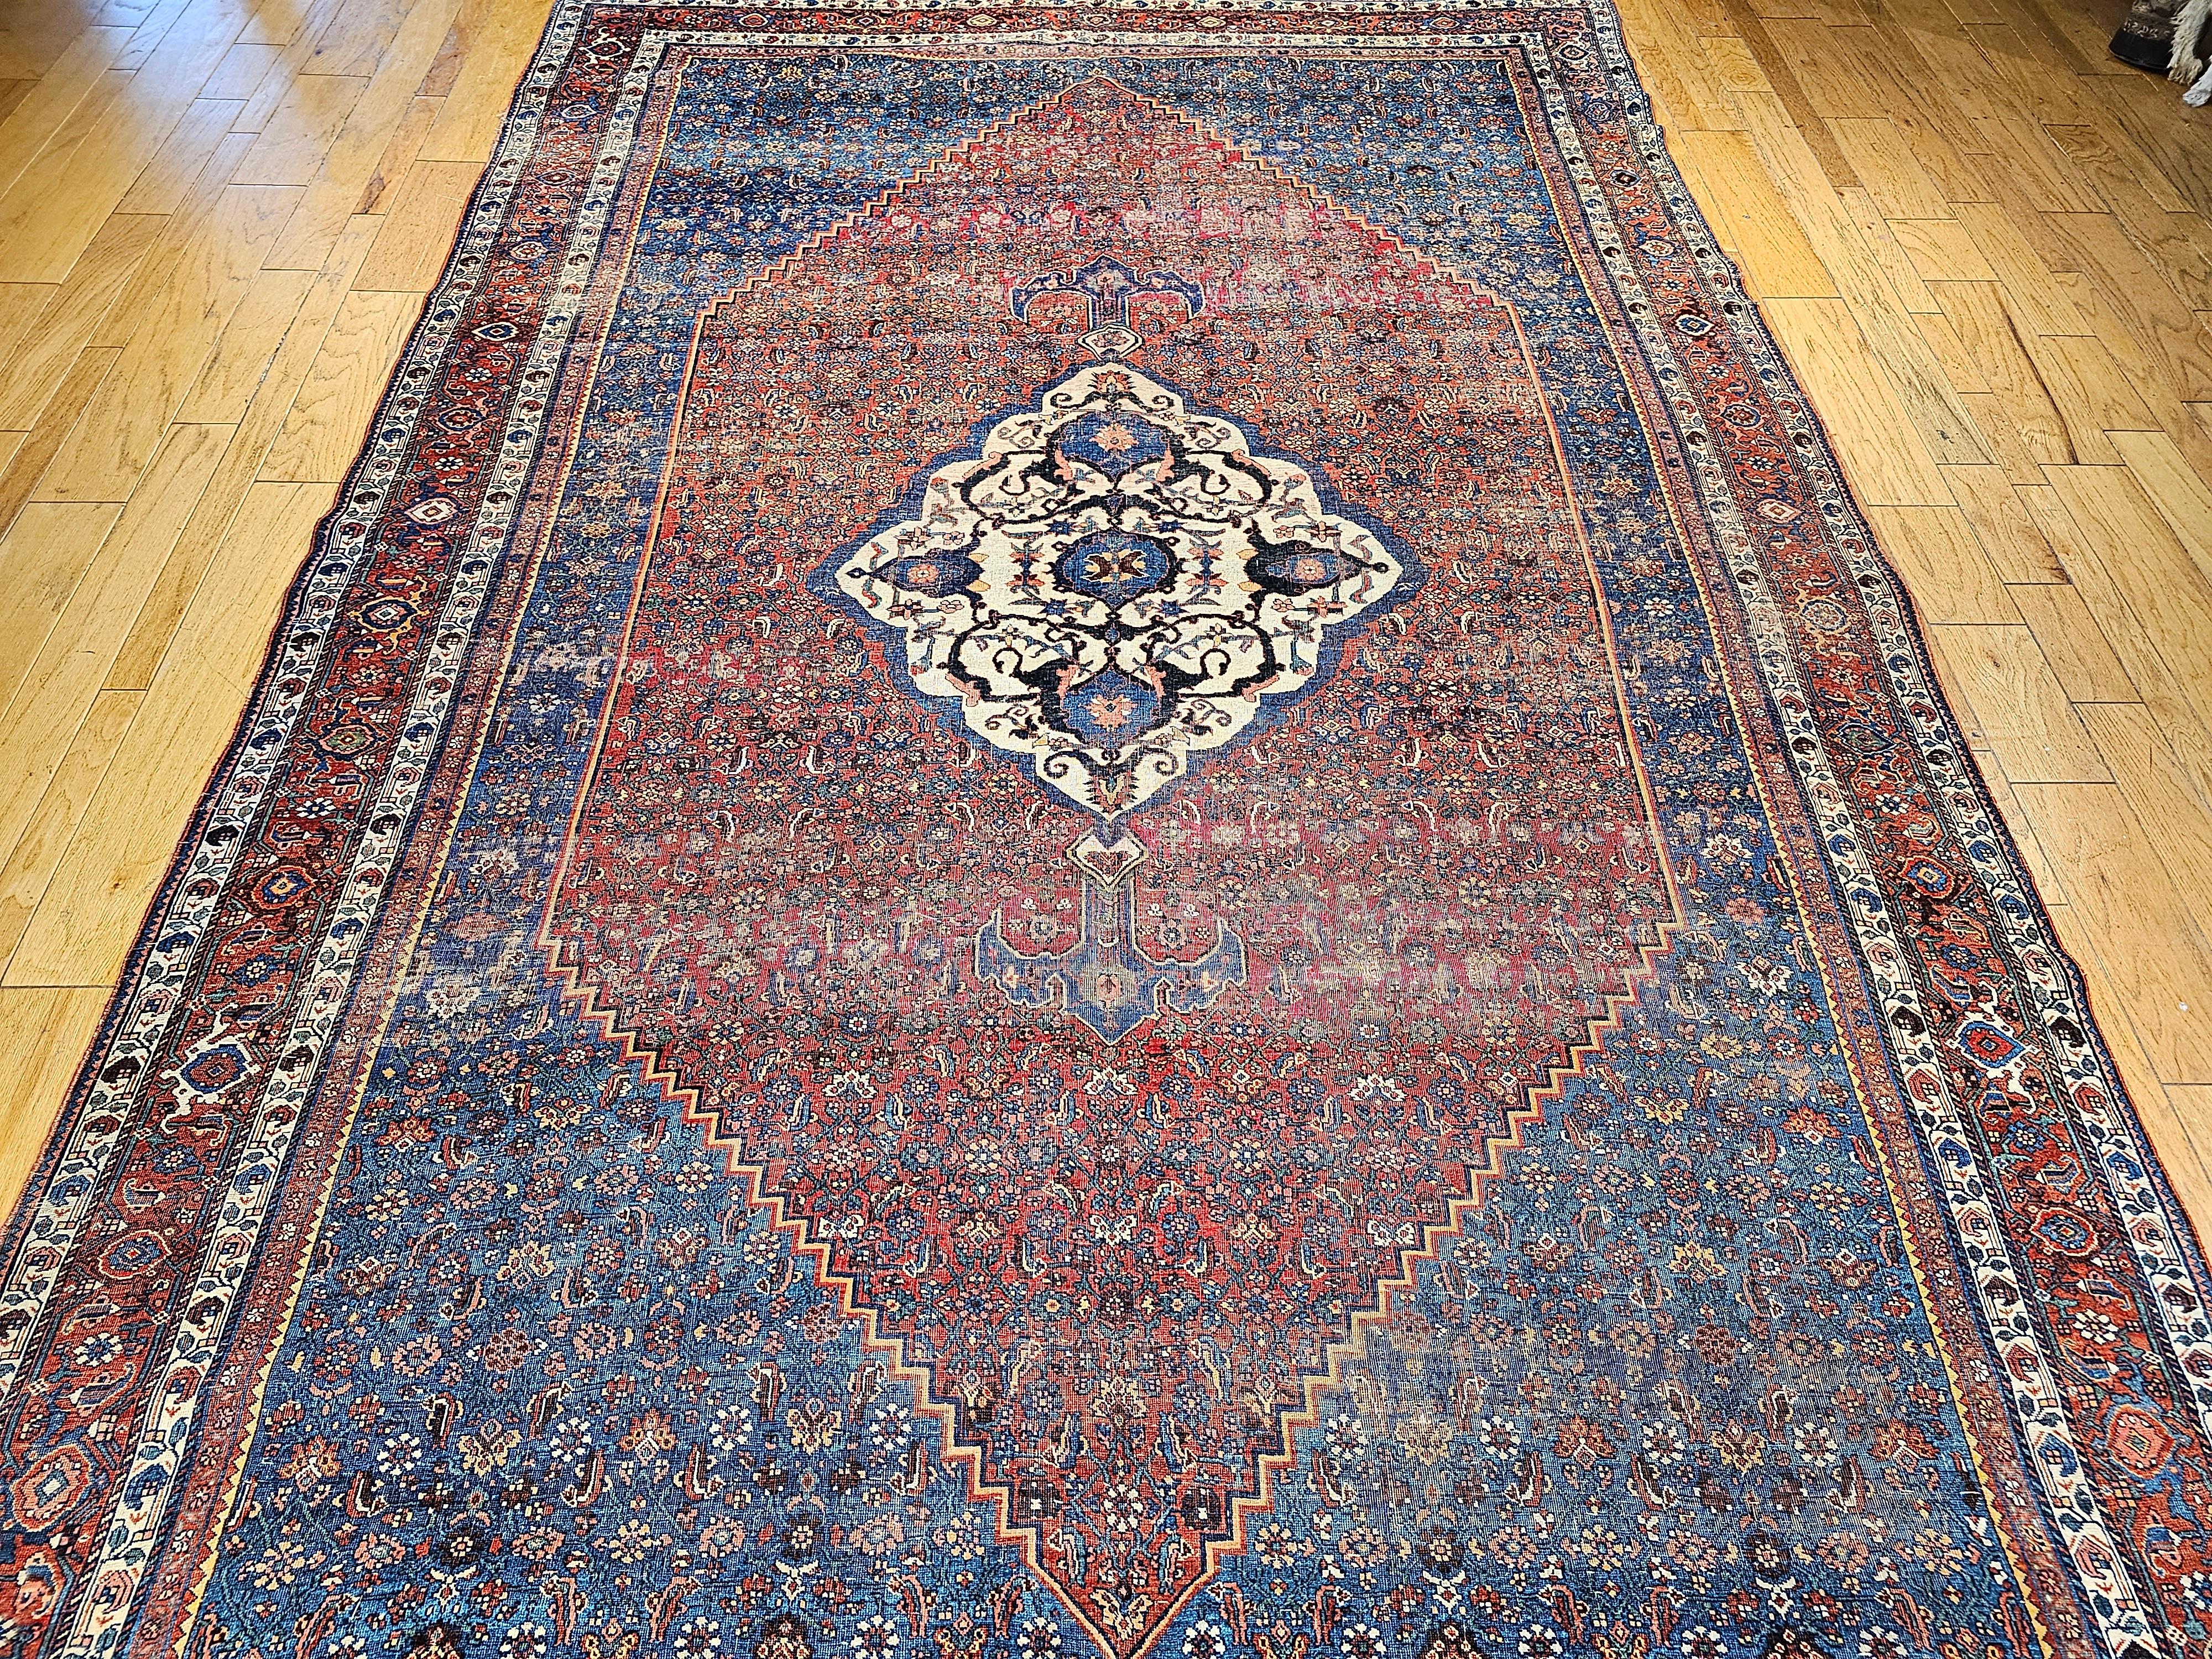 Vintage Persian Bidjar in a Herati Geometric Pattern in French Blue, Red, Ivory In Good Condition For Sale In Barrington, IL